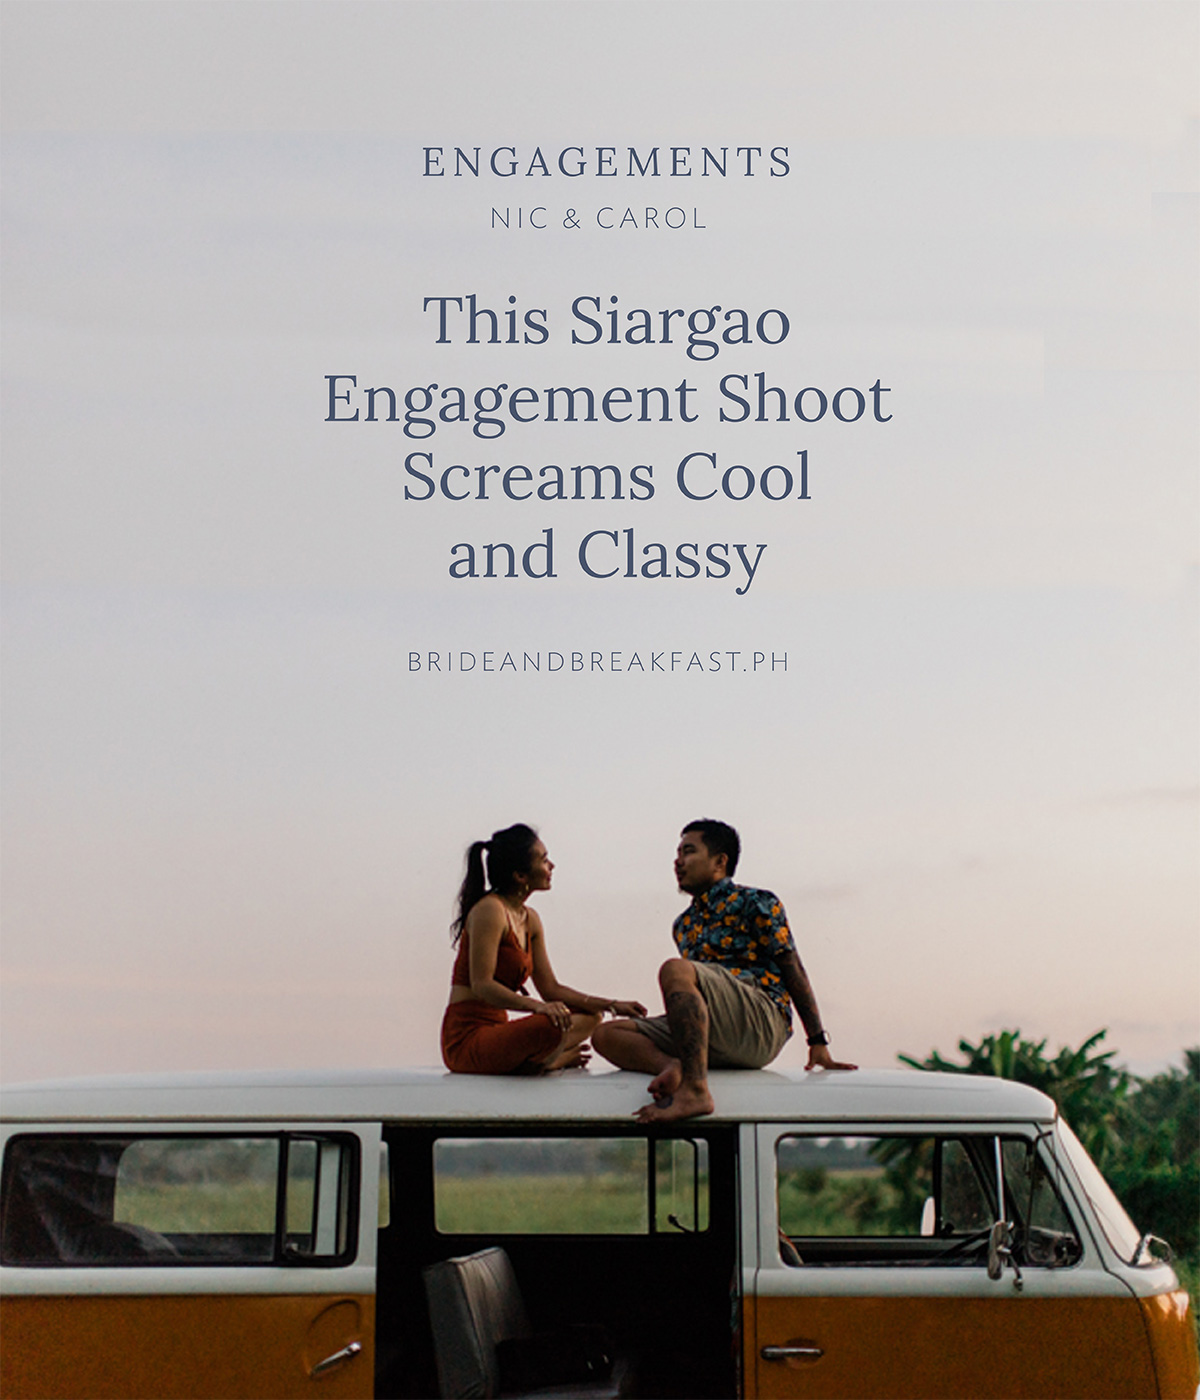 This Siargao Engagement Shoot Screams Cool and Classy